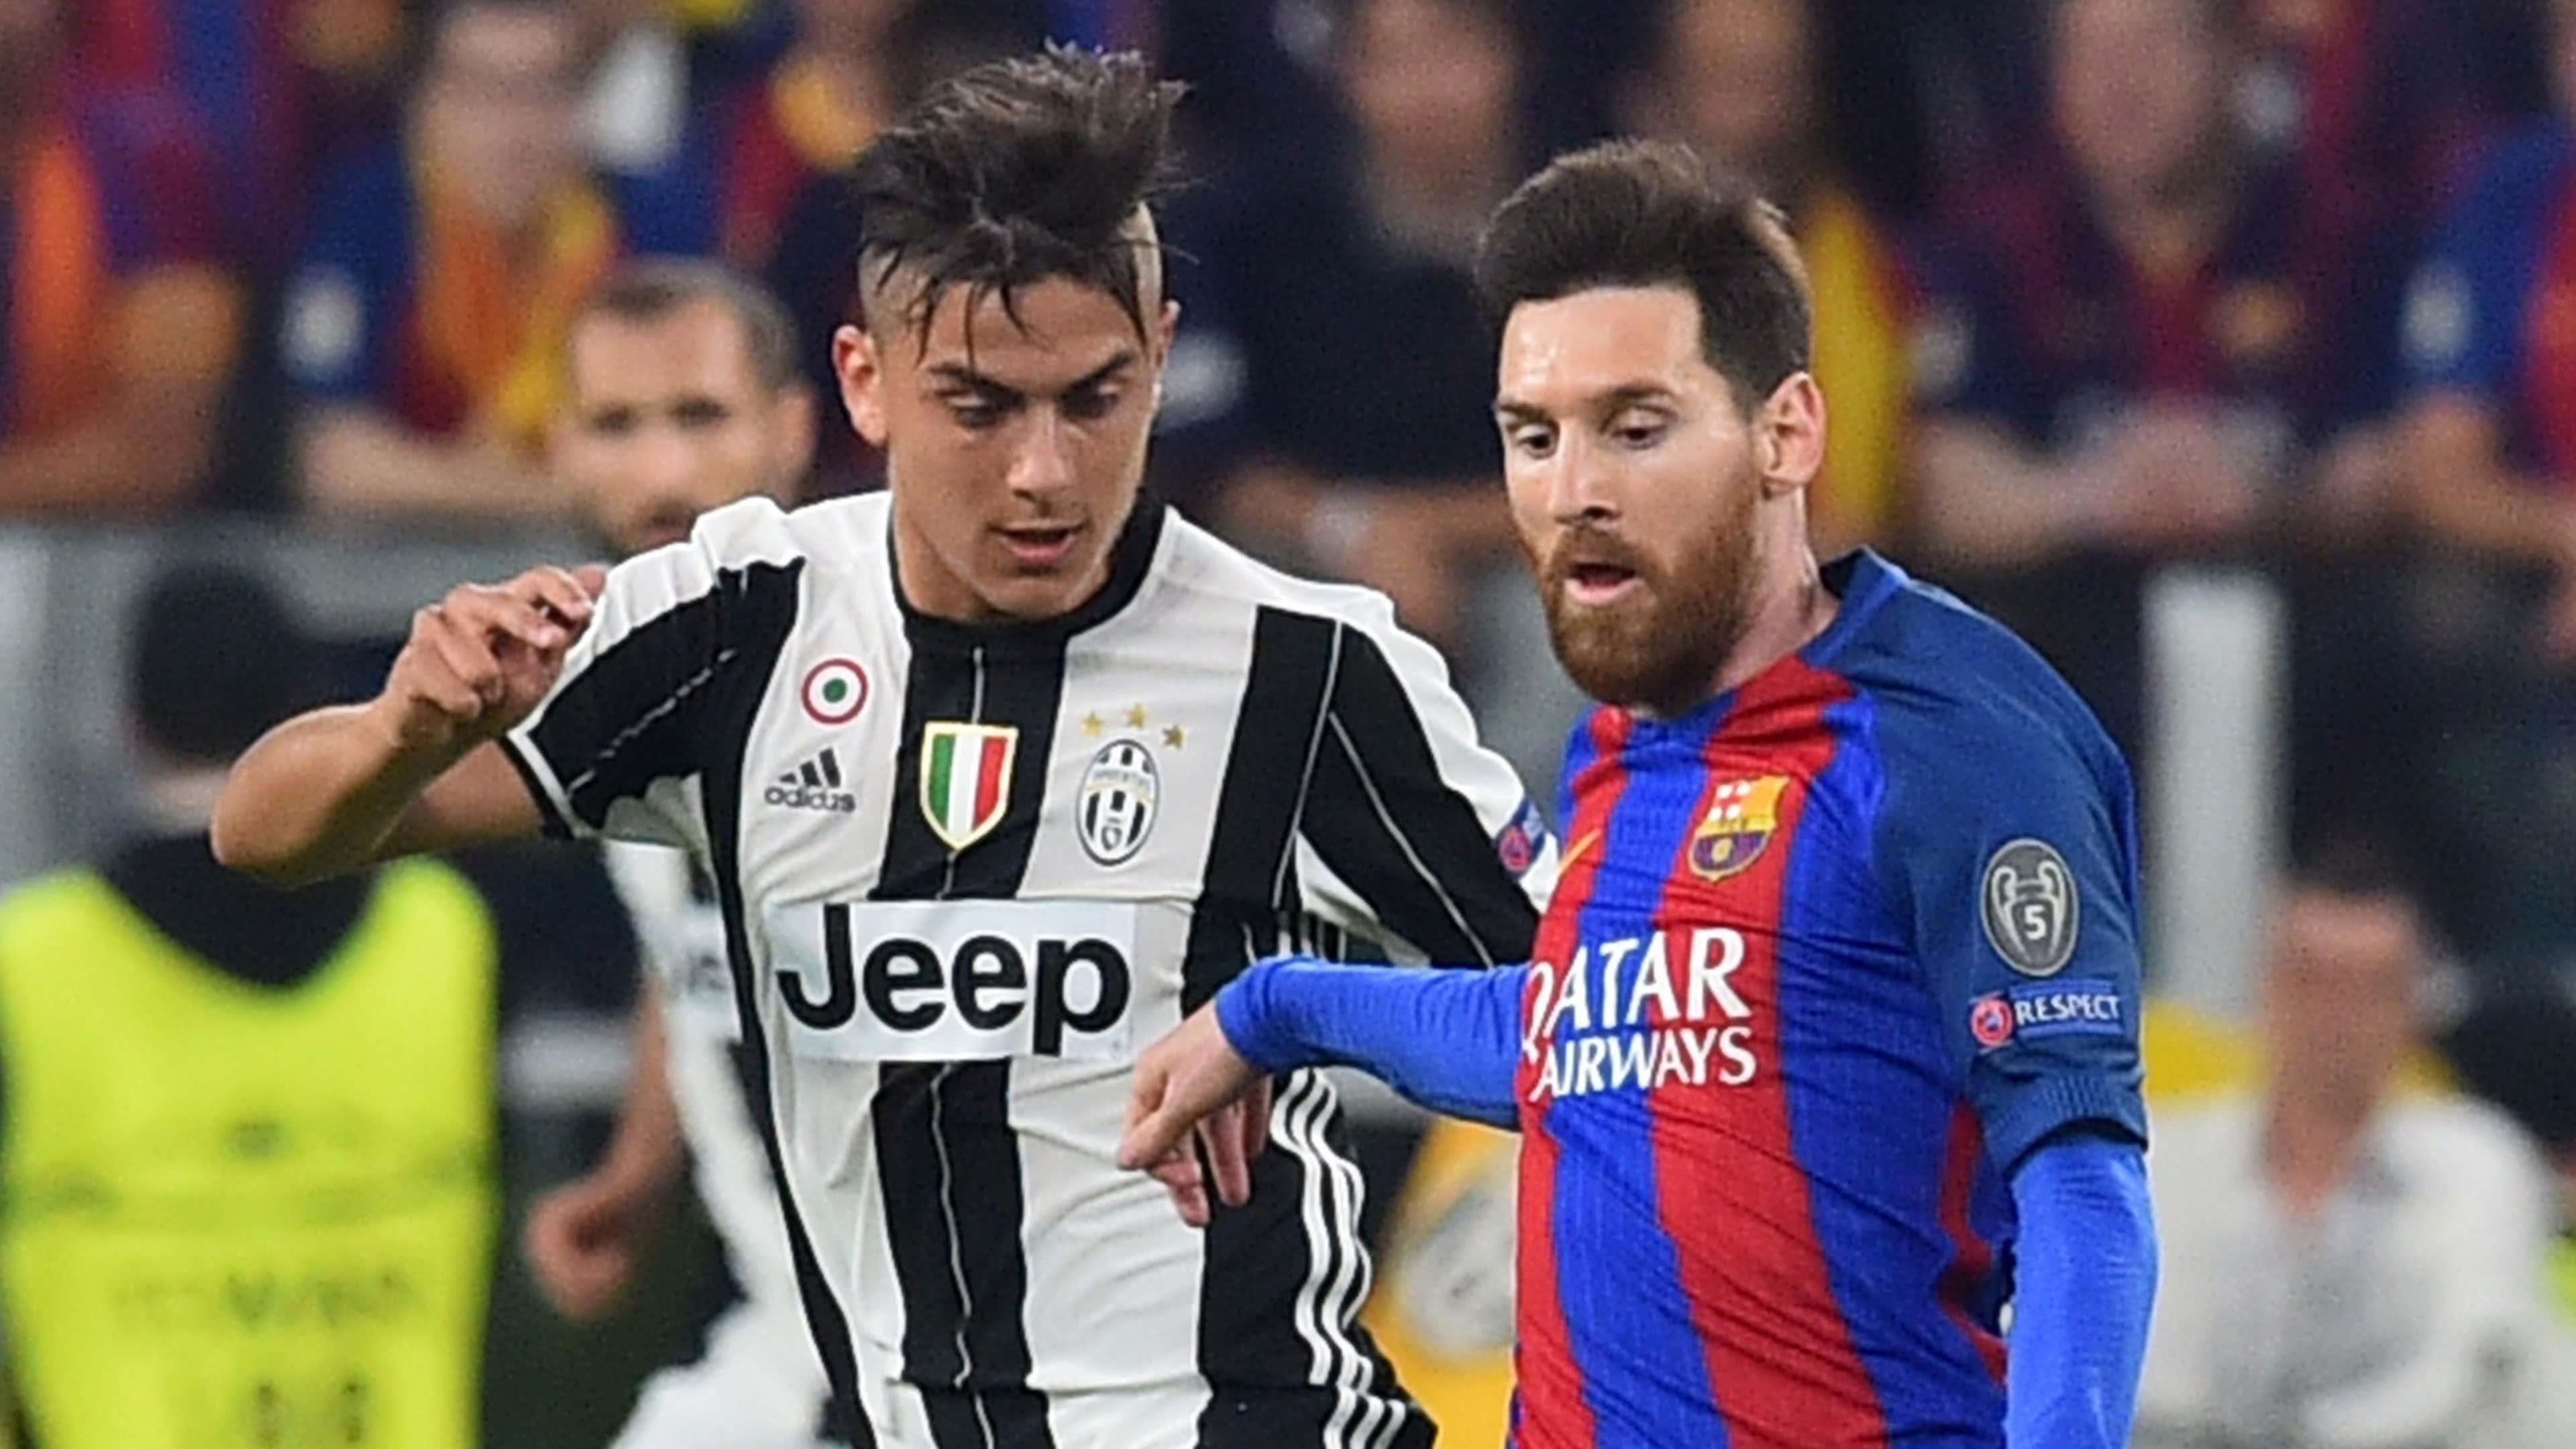 Cristiano Ronaldo's Jersey Excluded from Lionel Messi & Paulo